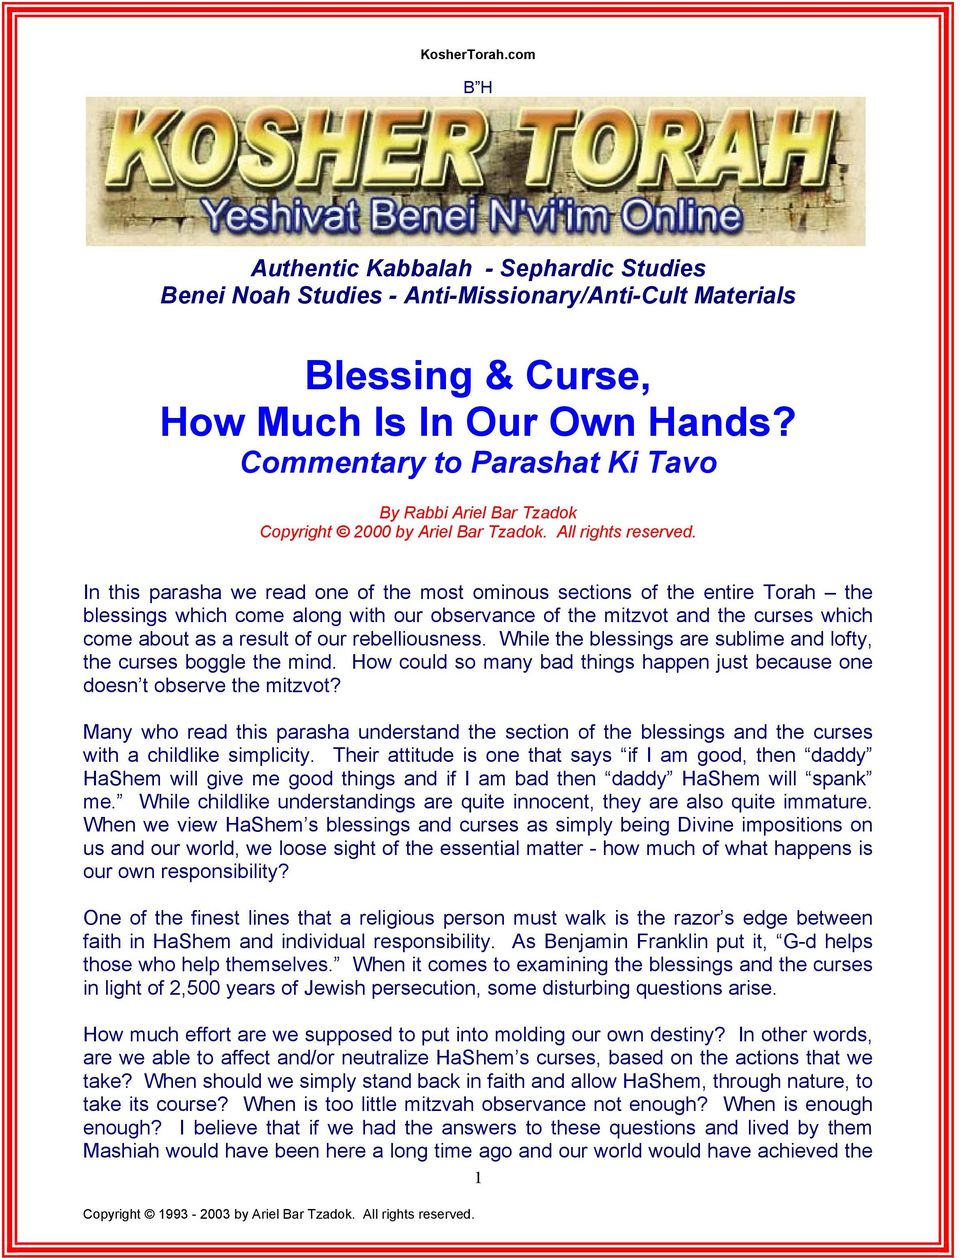 In this parasha we read one of the most ominous sections of the entire Torah the blessings which come along with our observance of the mitzvot and the curses which come about as a result of our